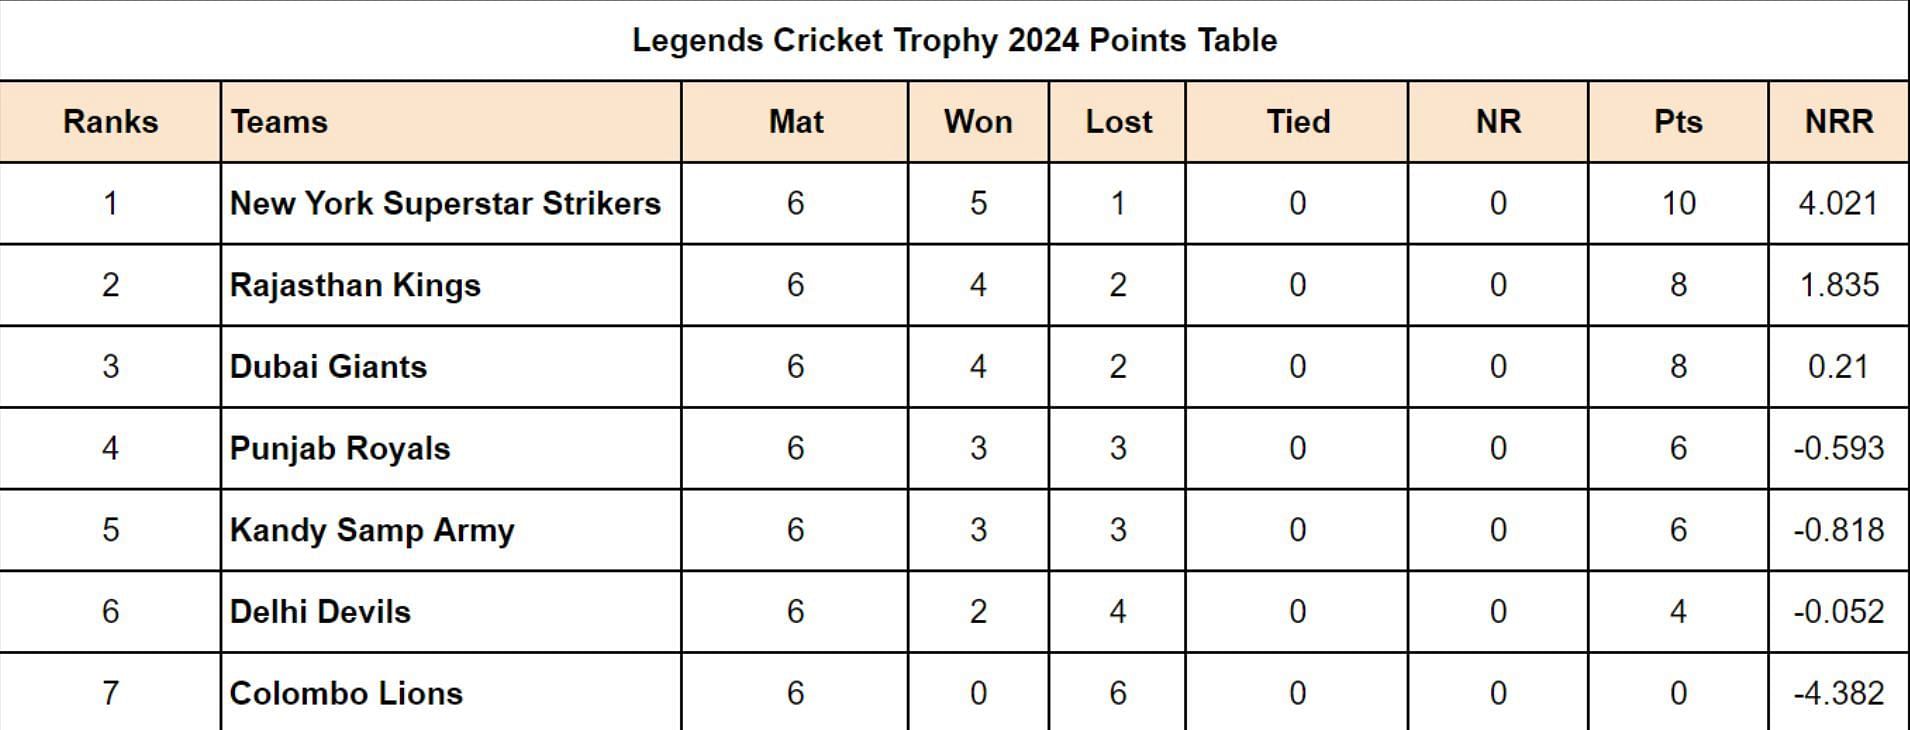 Legends Cricket Trophy 2024 Points Table Updated after Match 21